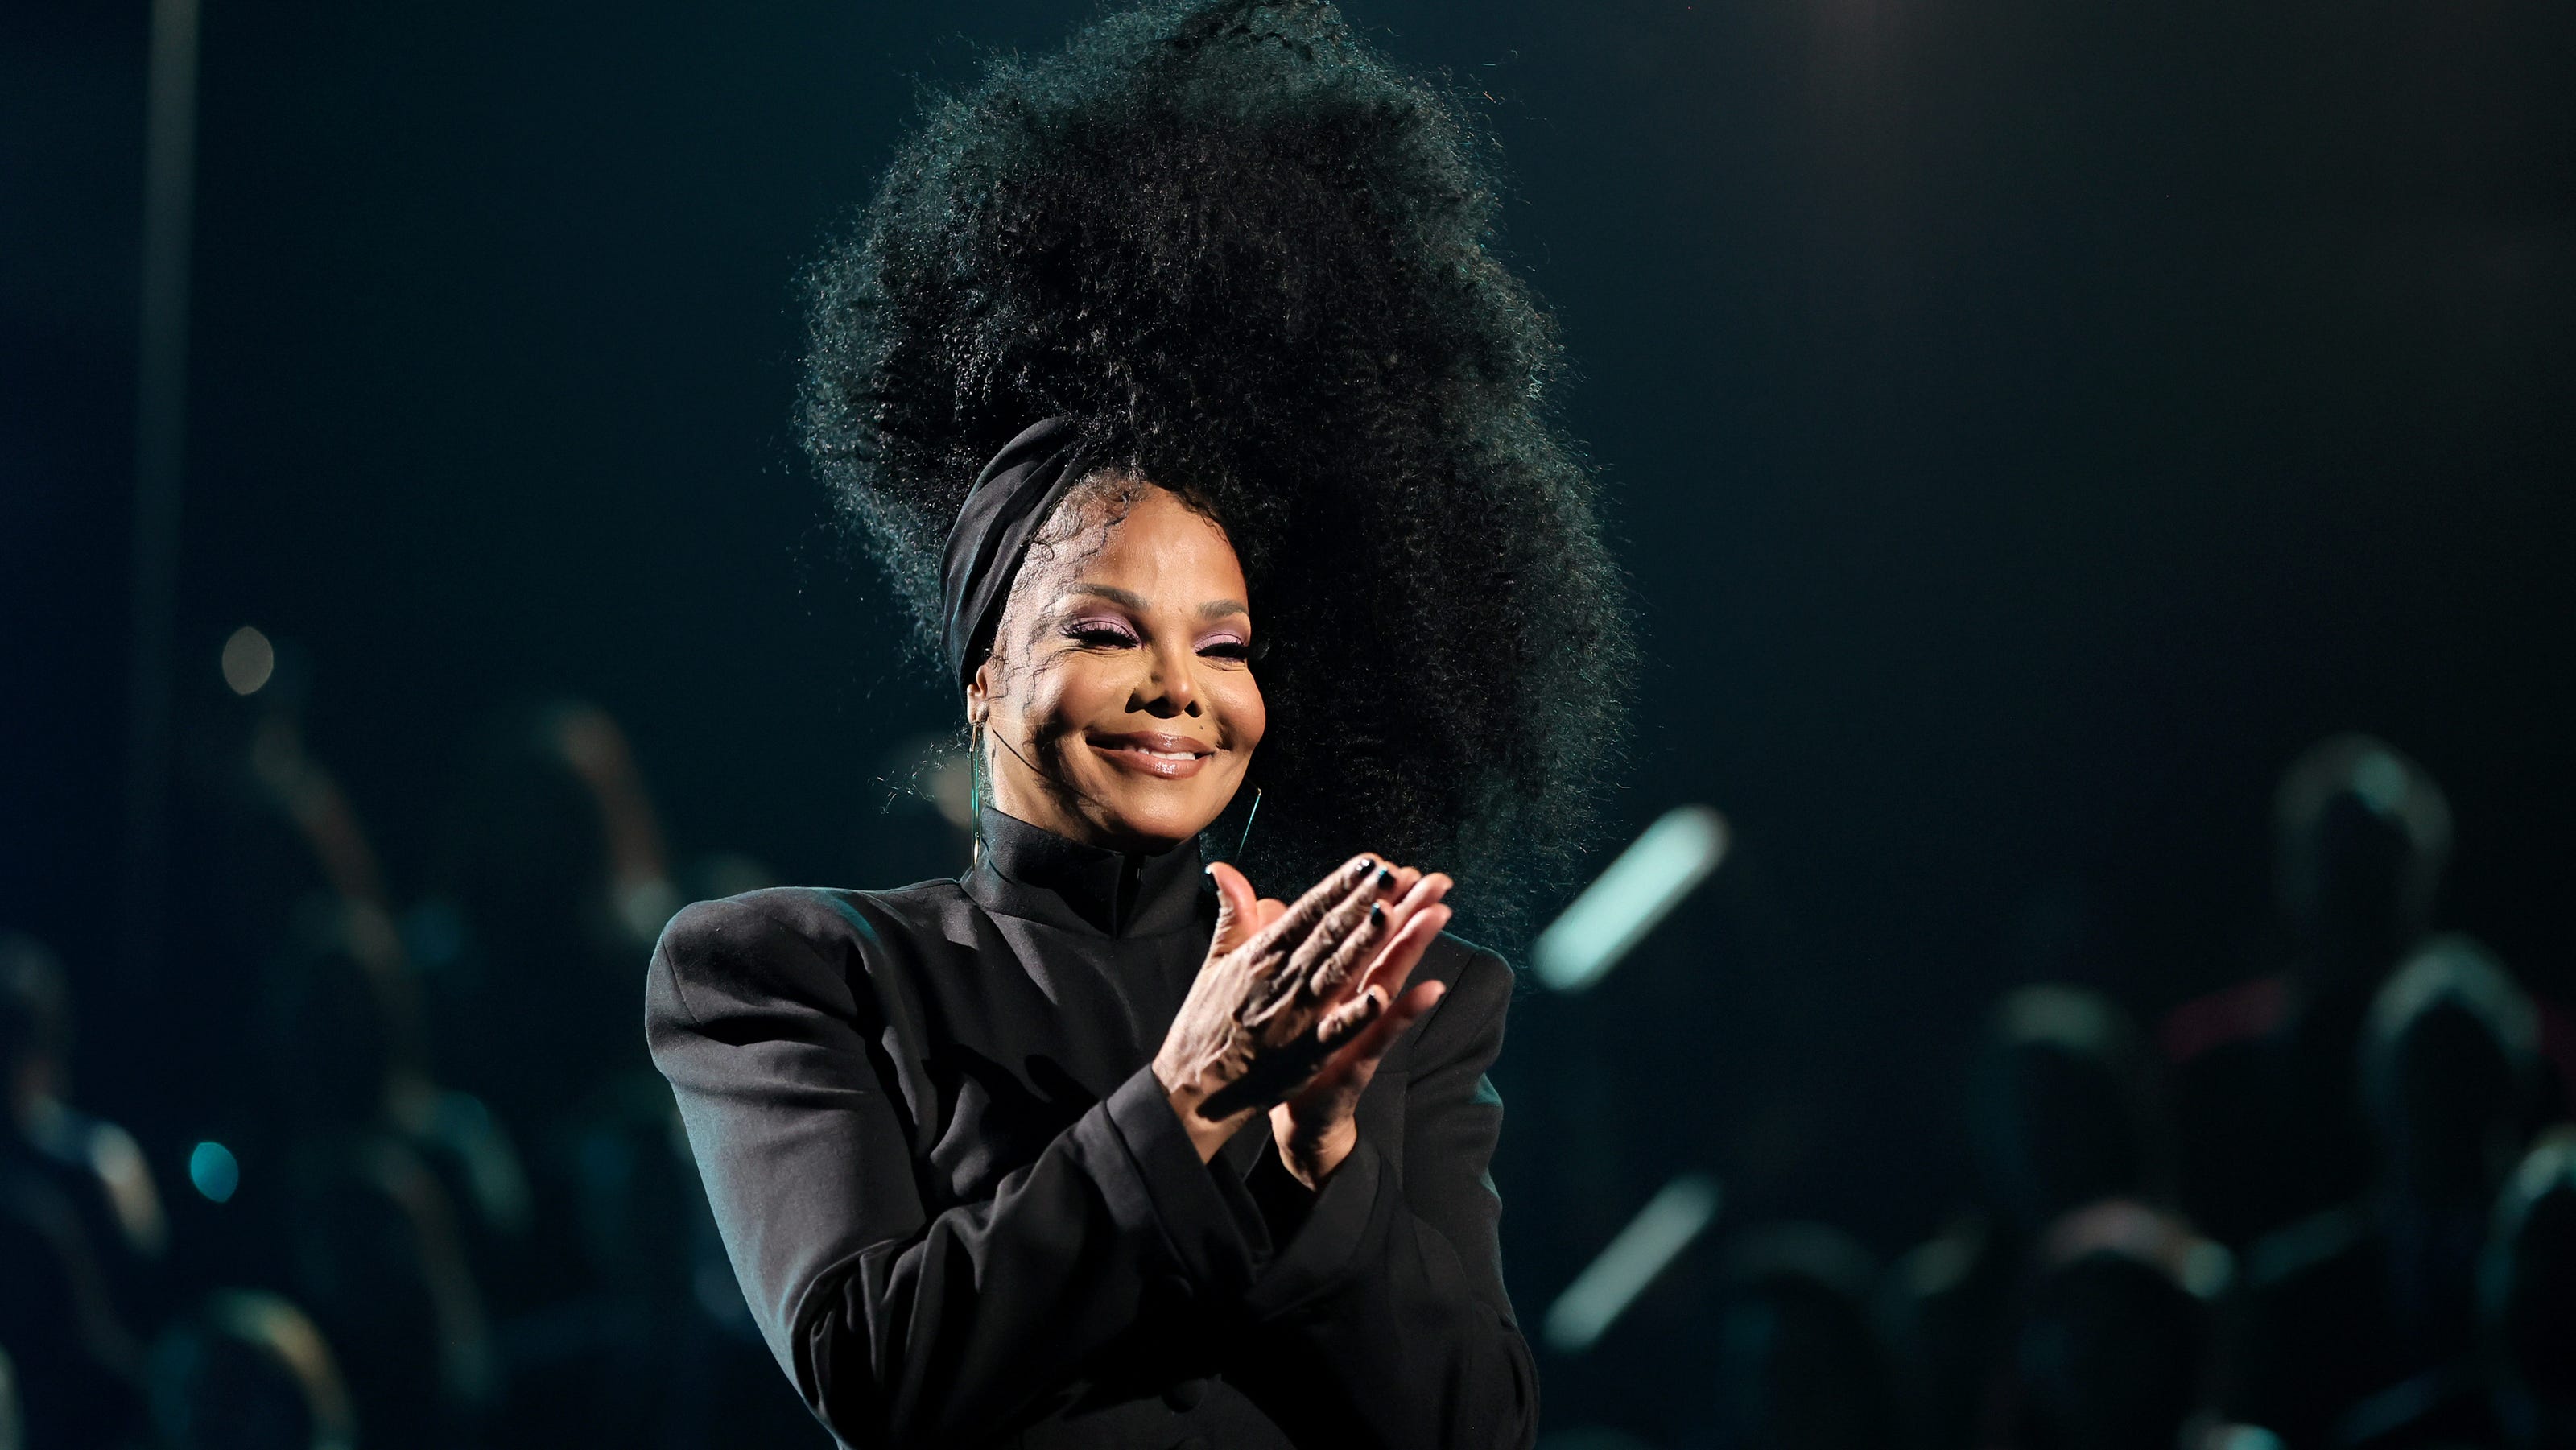  Janet Jackson to play Detroit's Little Caesars Arena in 2023 for Together Again tour 